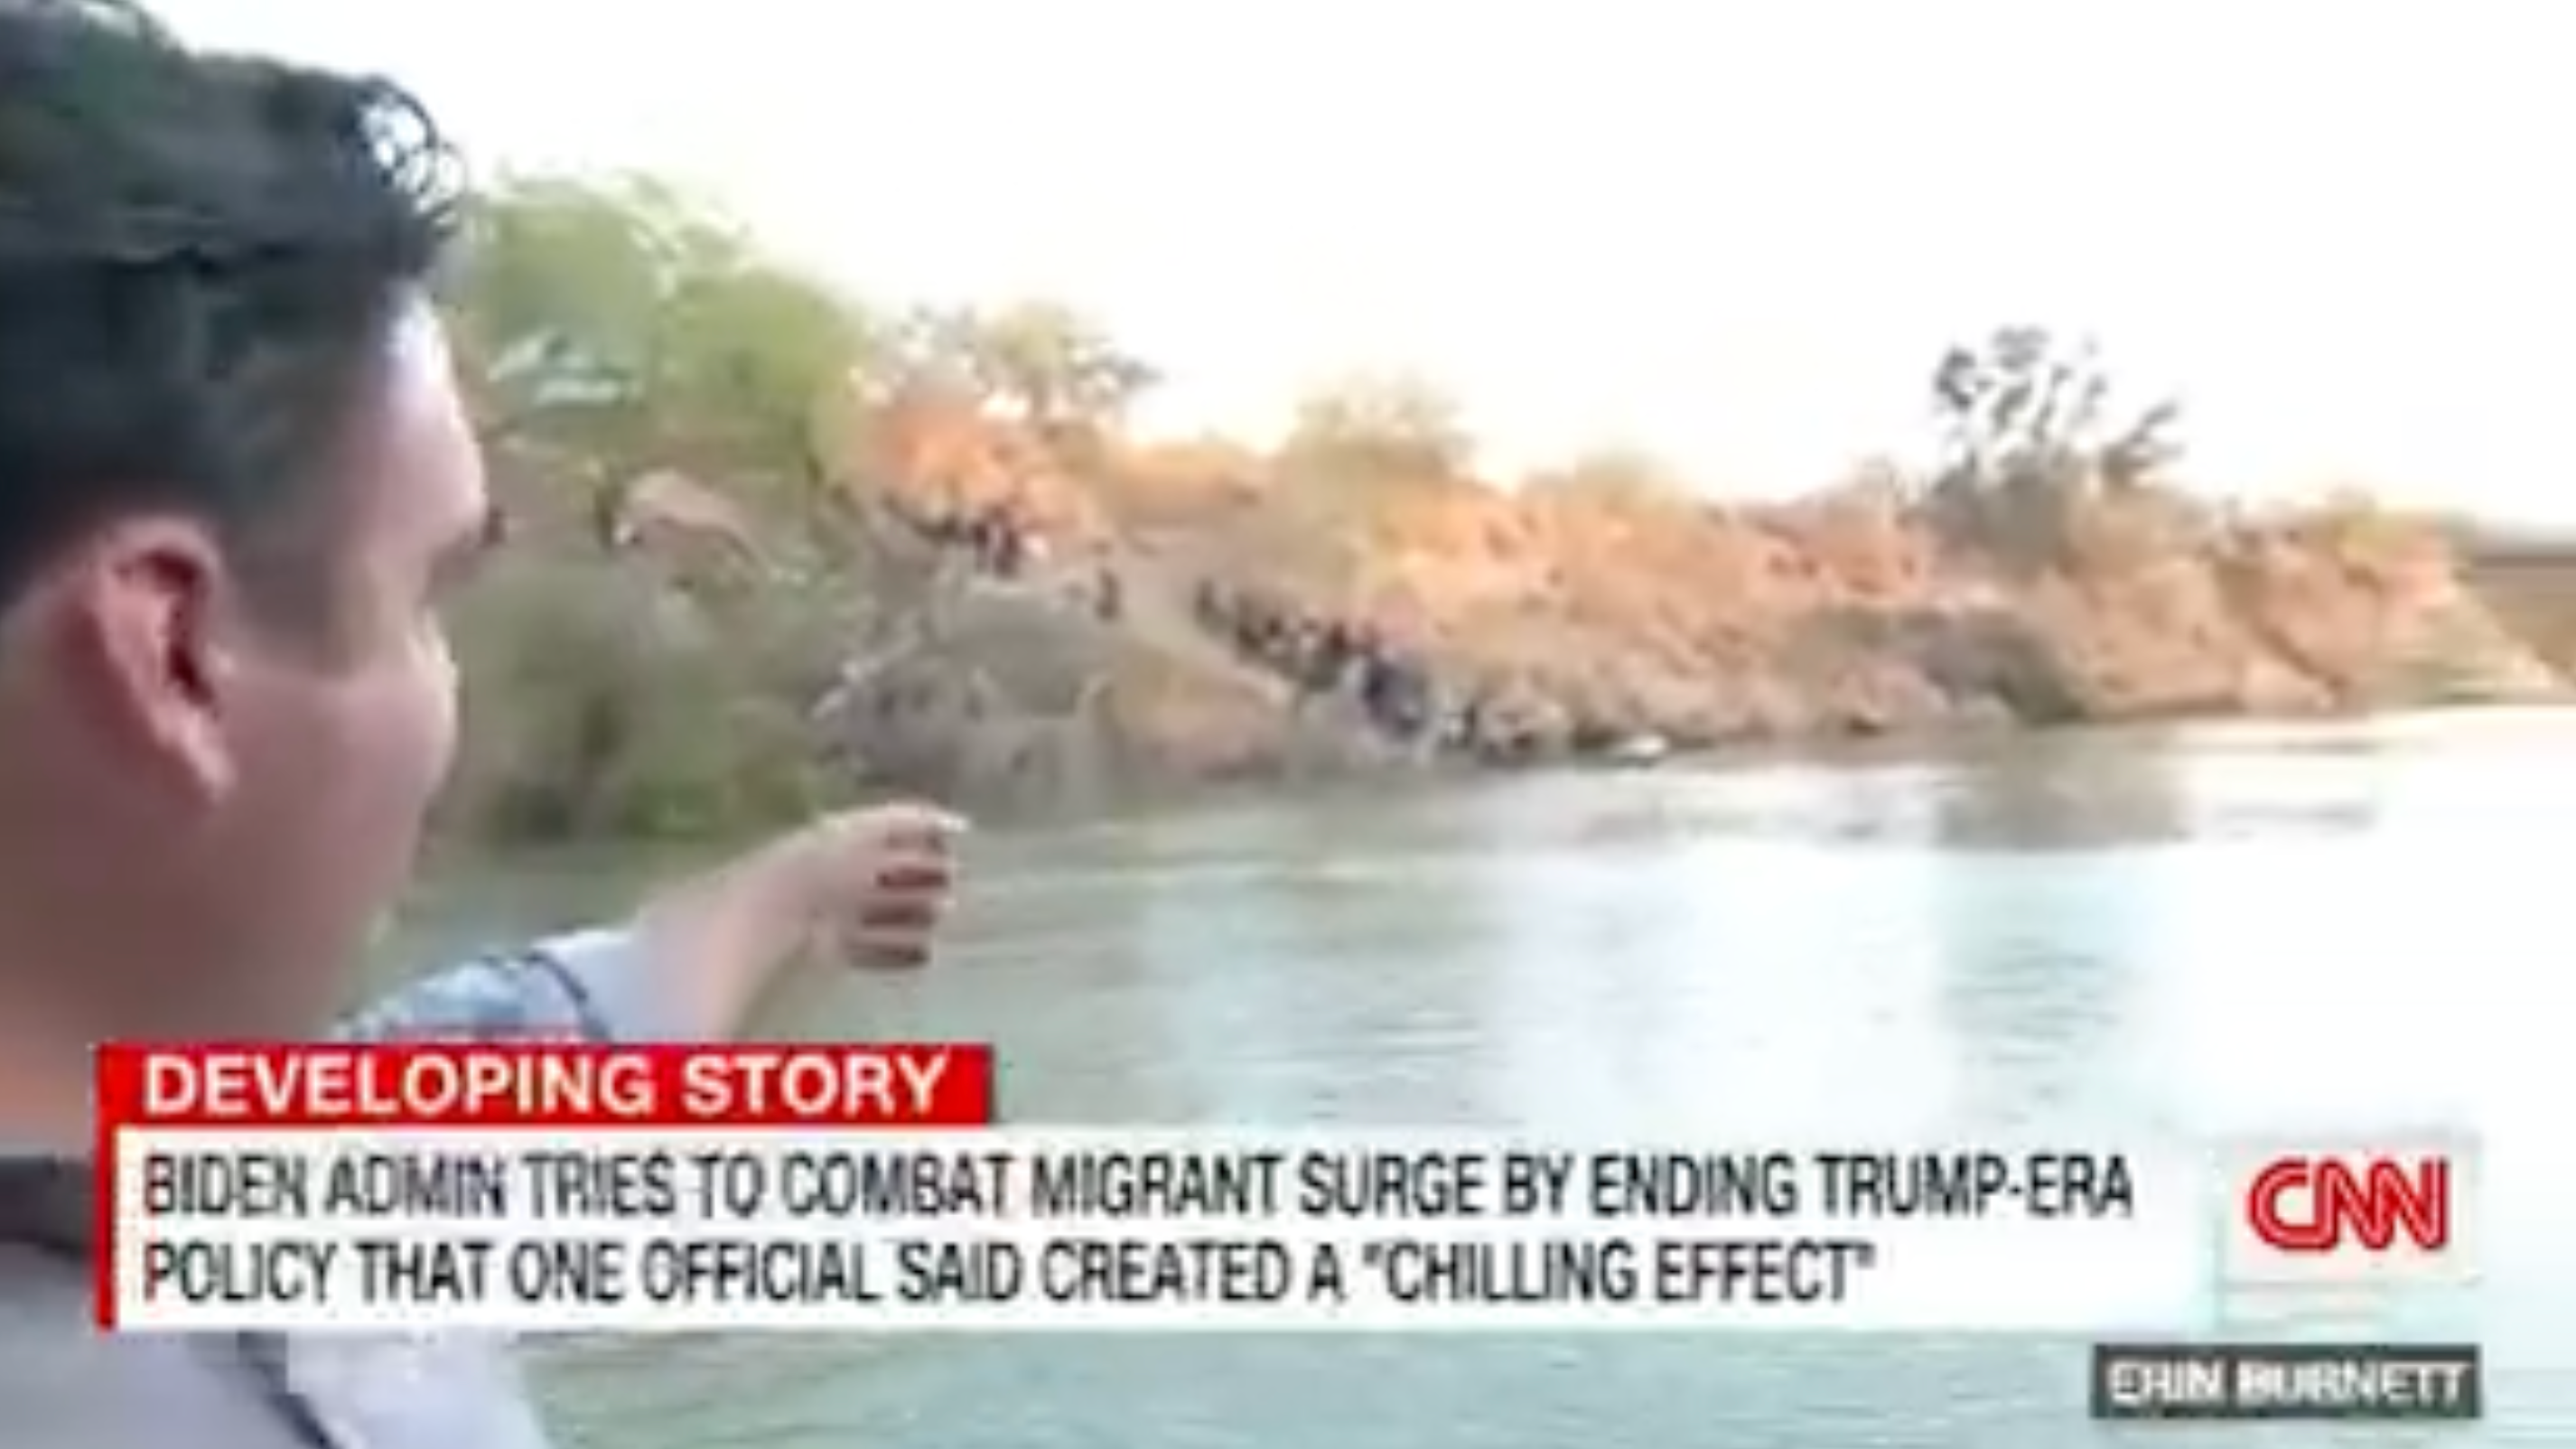 Progressive media claims that CNN may have “staged” the crossing of migrants from Rio Grande